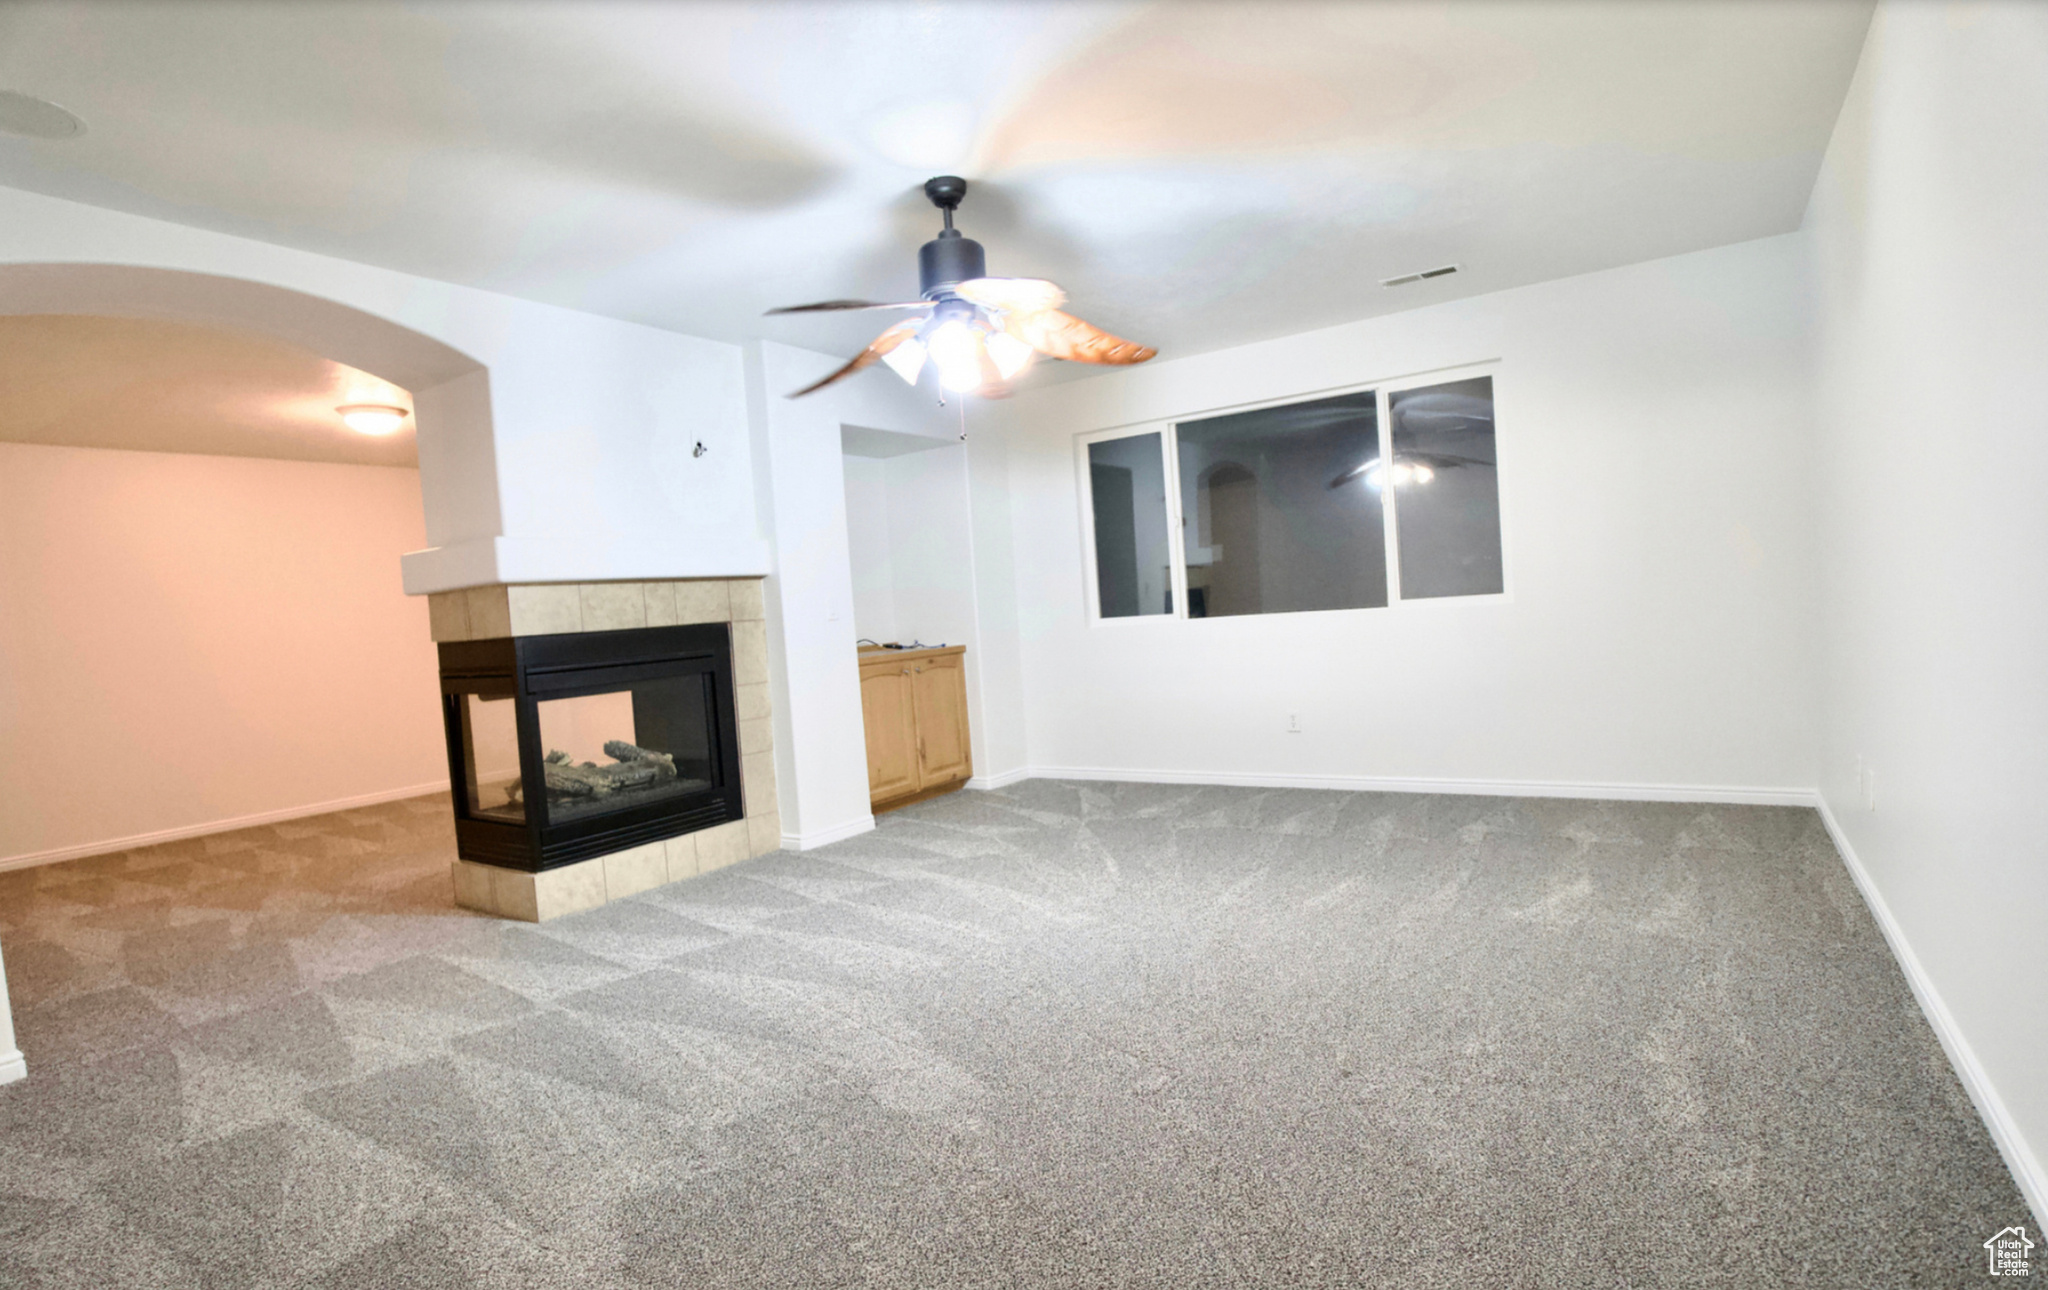 Unfurnished living room with ceiling fan, light carpet, and a fireplace